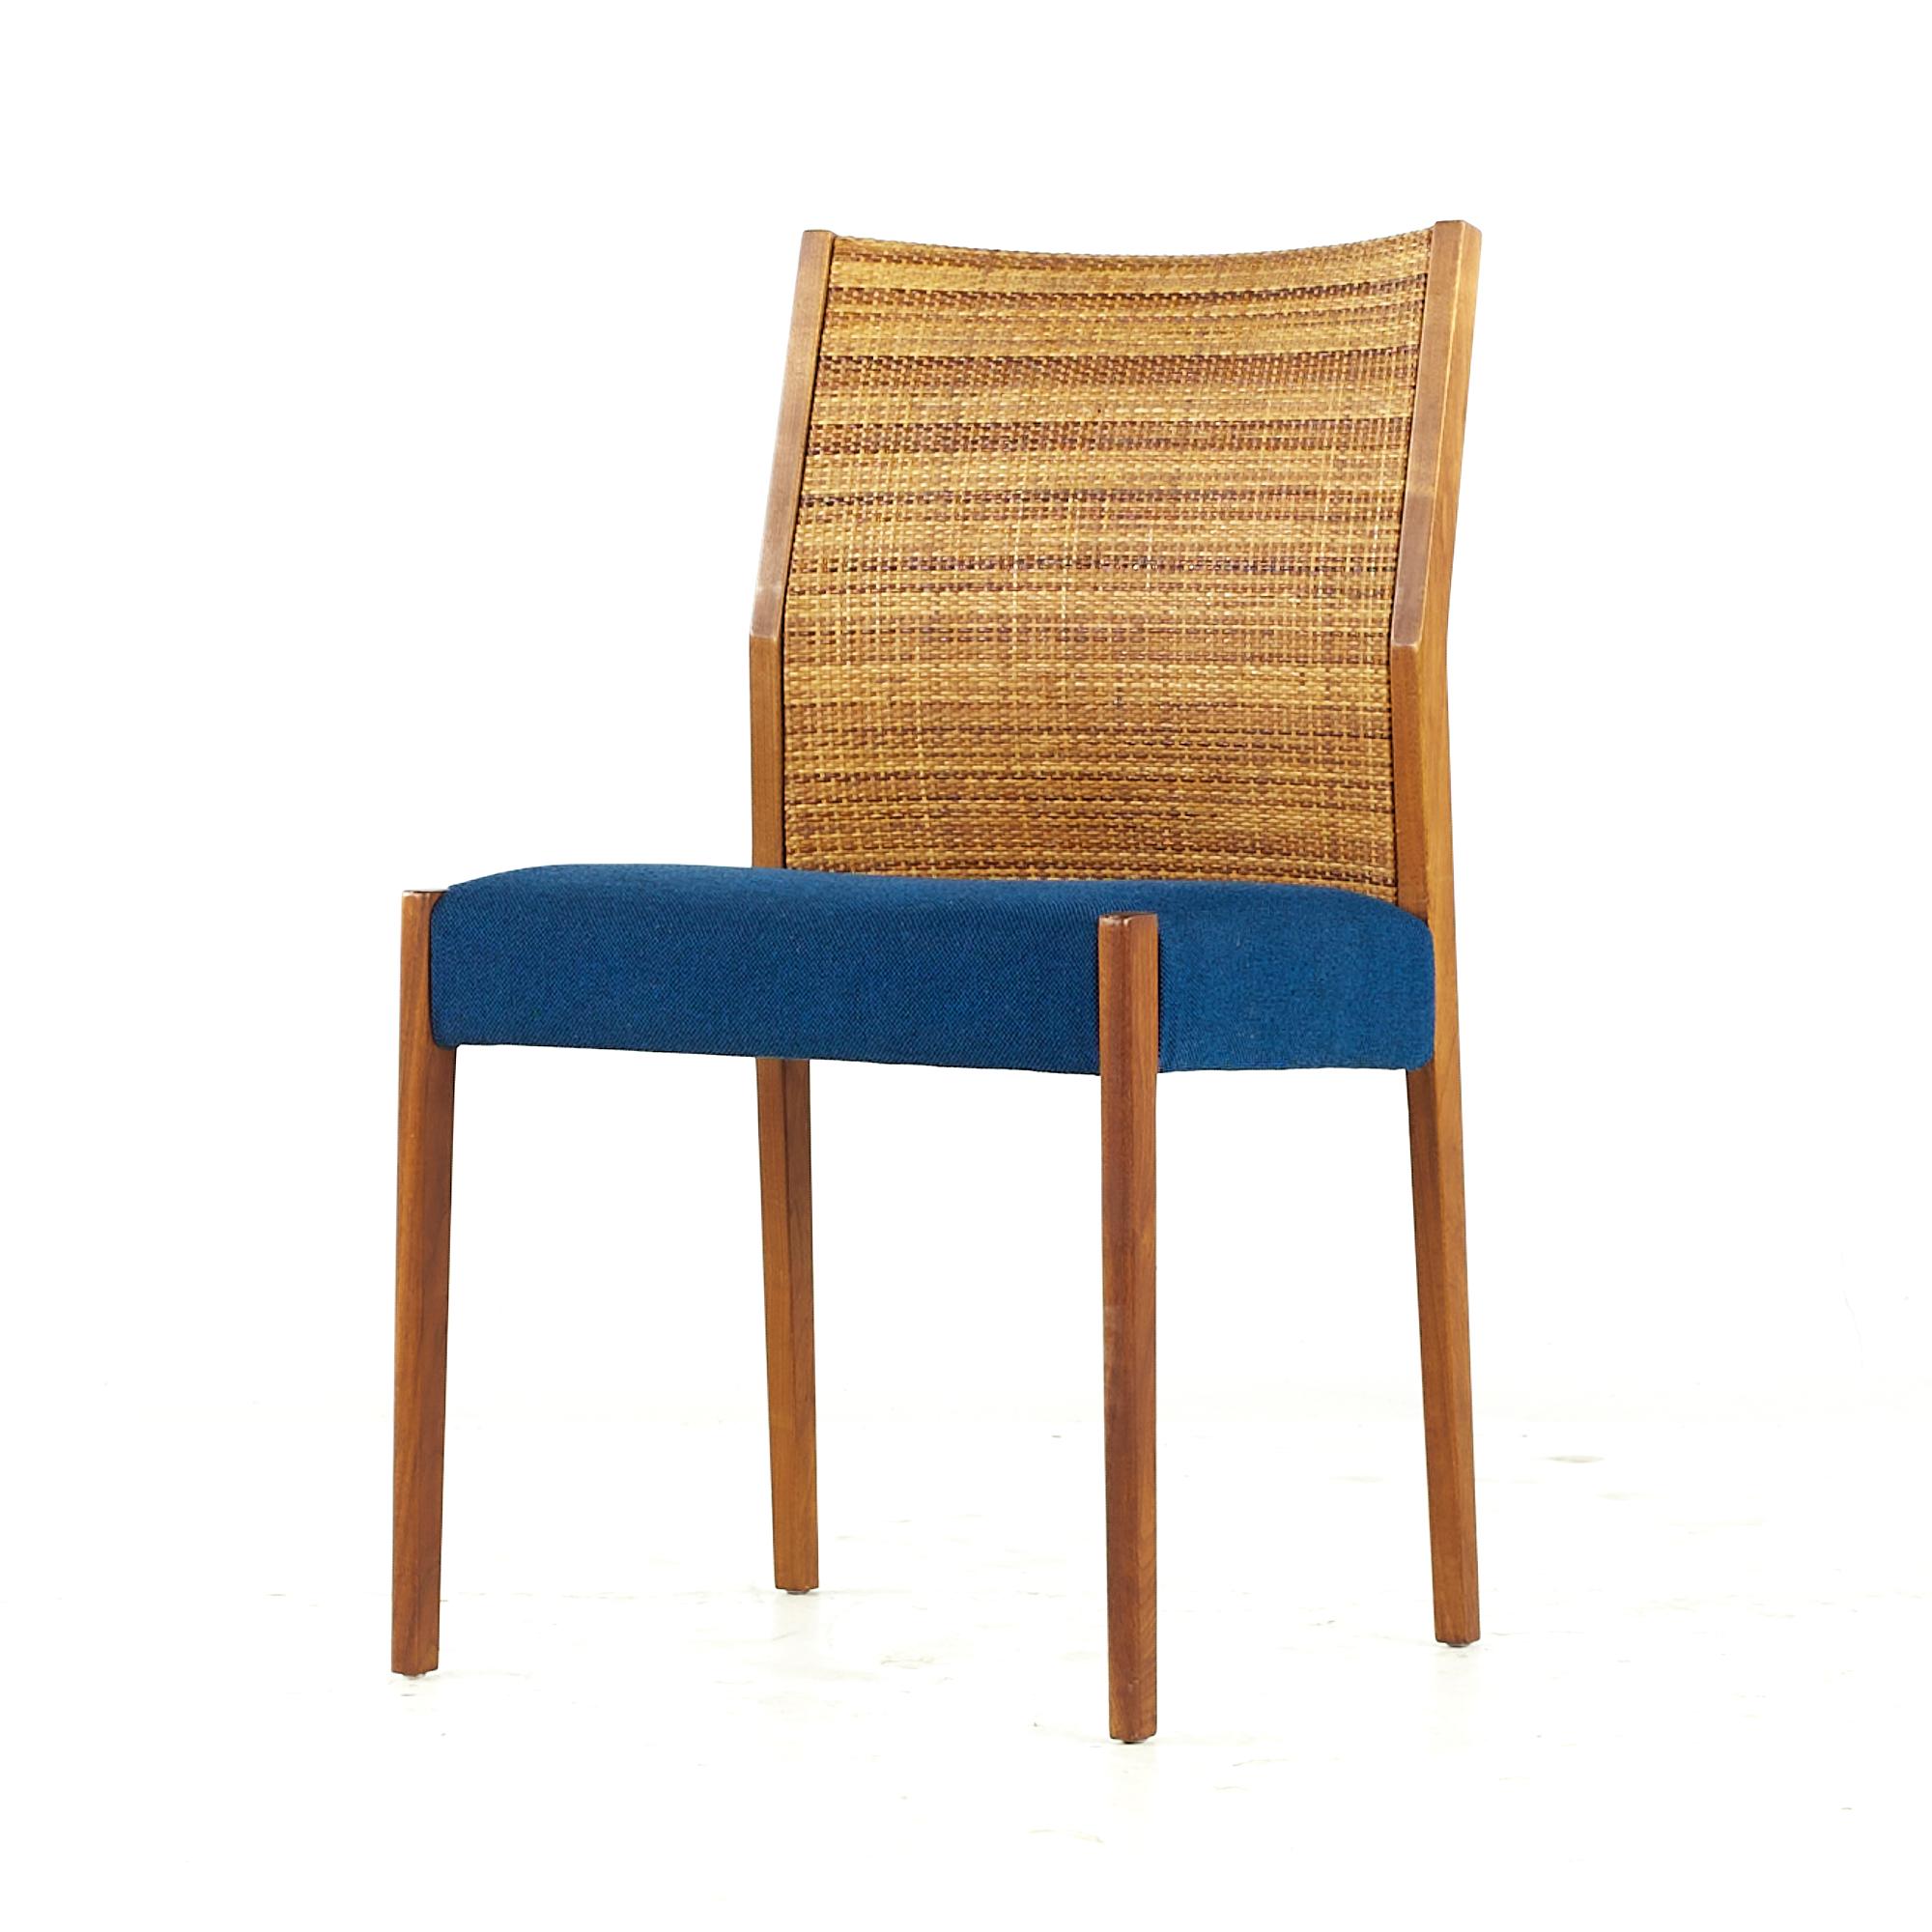 Fin du 20e siècle Jens Risom Mid Century Cane and Walnut Dining Chairs - Set of 6 en vente